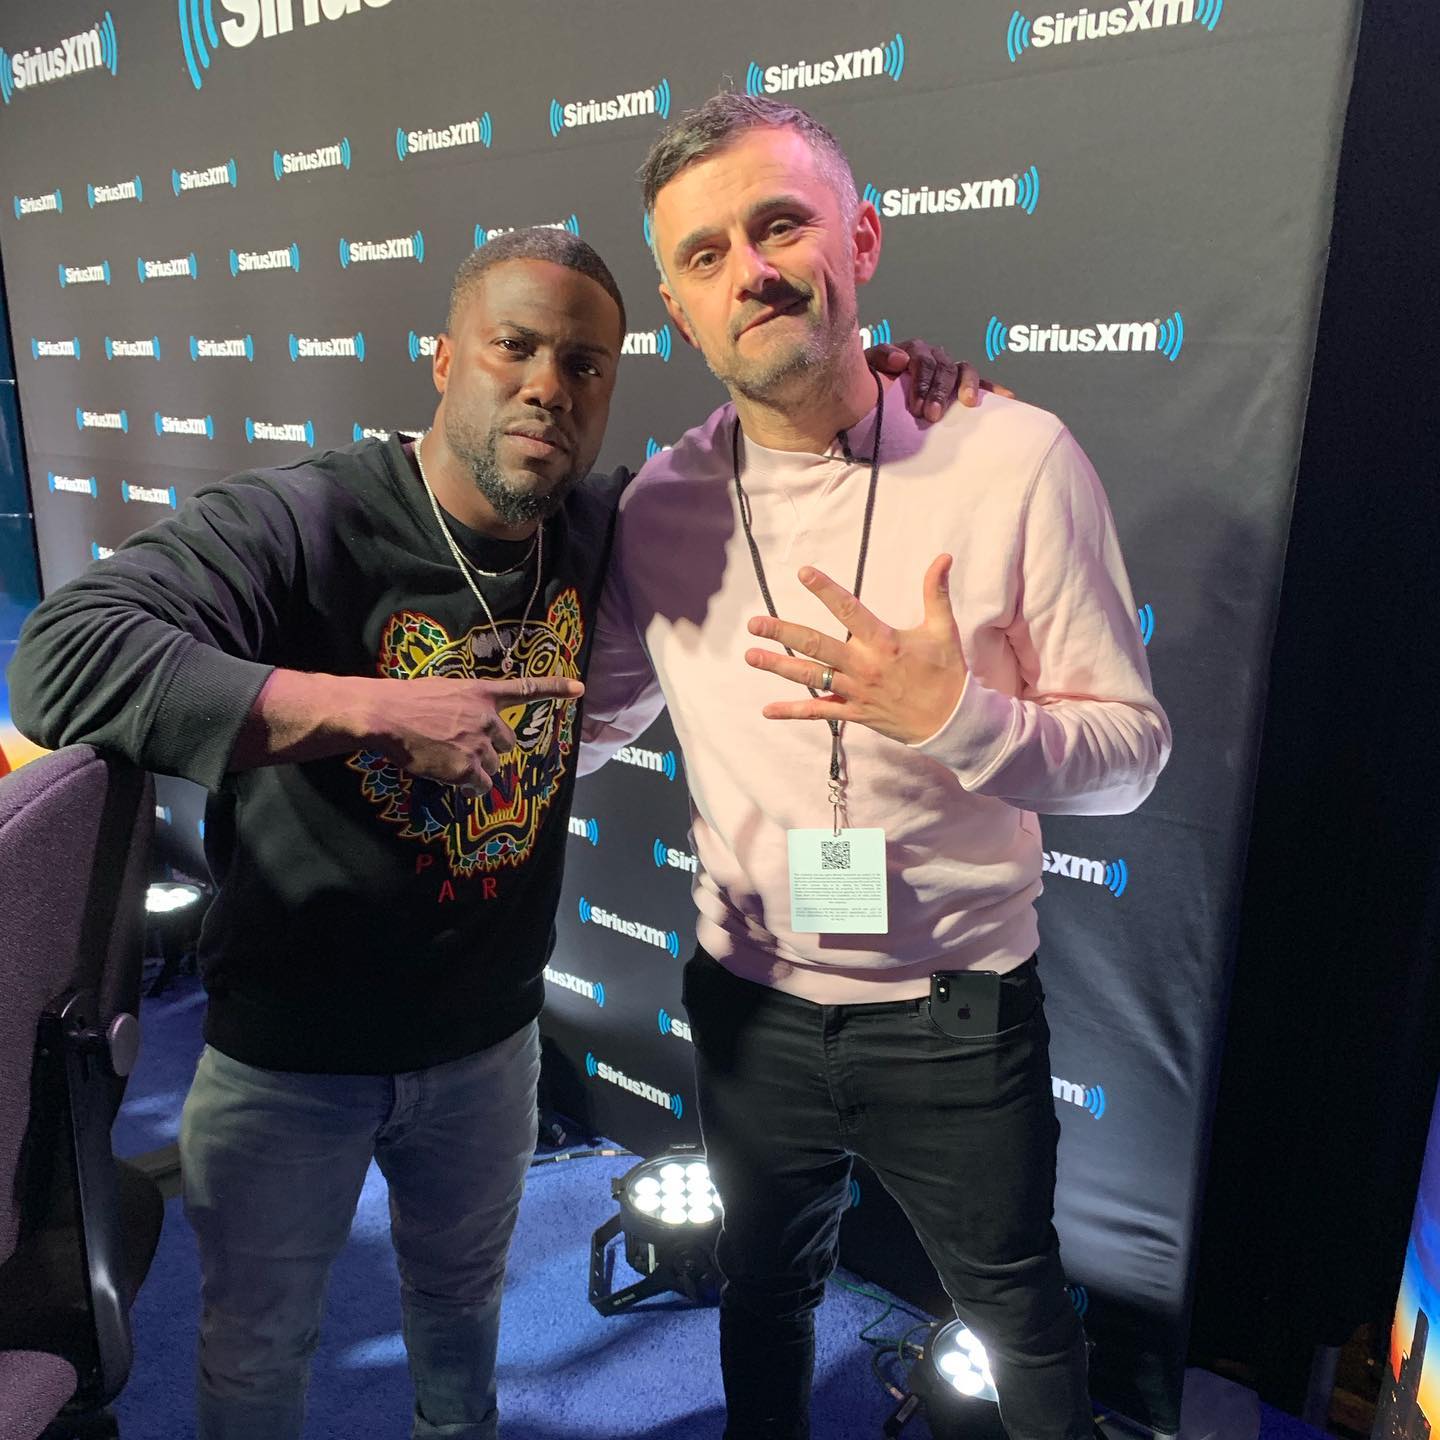 gary vee and kevin hart